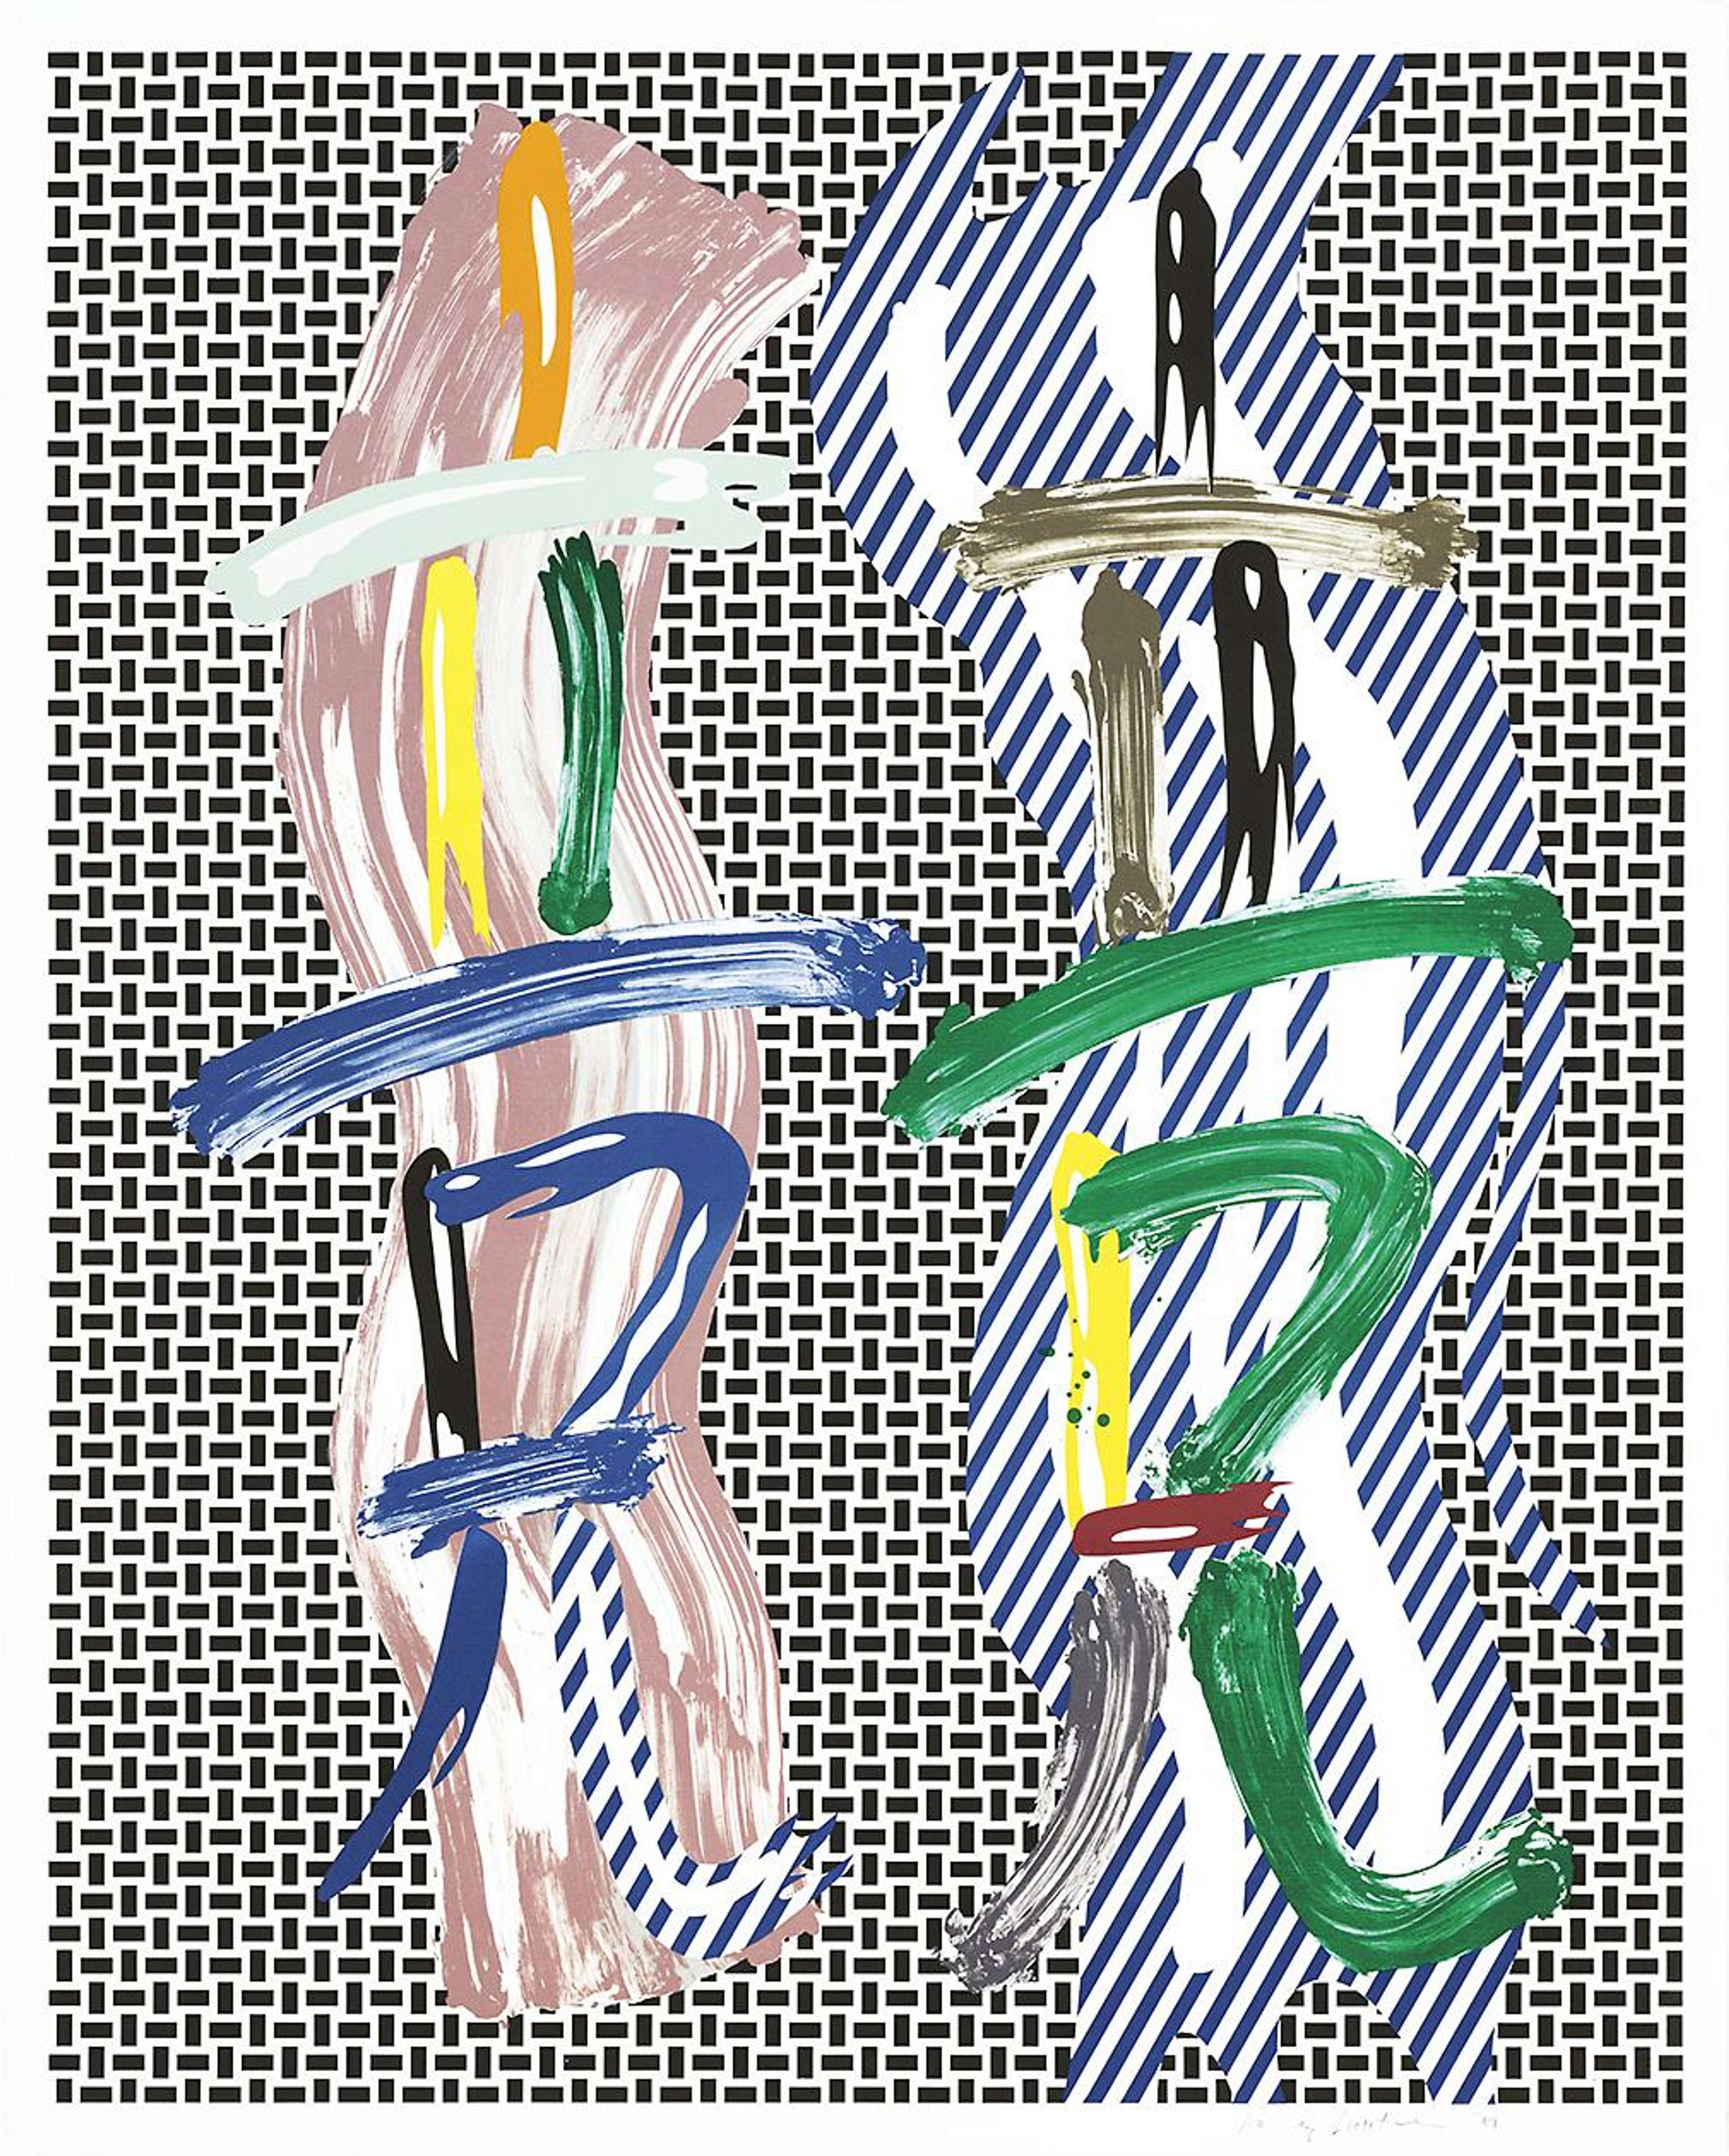 An image of the print Brushstroke Contest by Roy Lichtenstein. It shows intersecting pastel brushstrokes spelling out the Chinese characters of the word ‘contest’, against a patterned background.